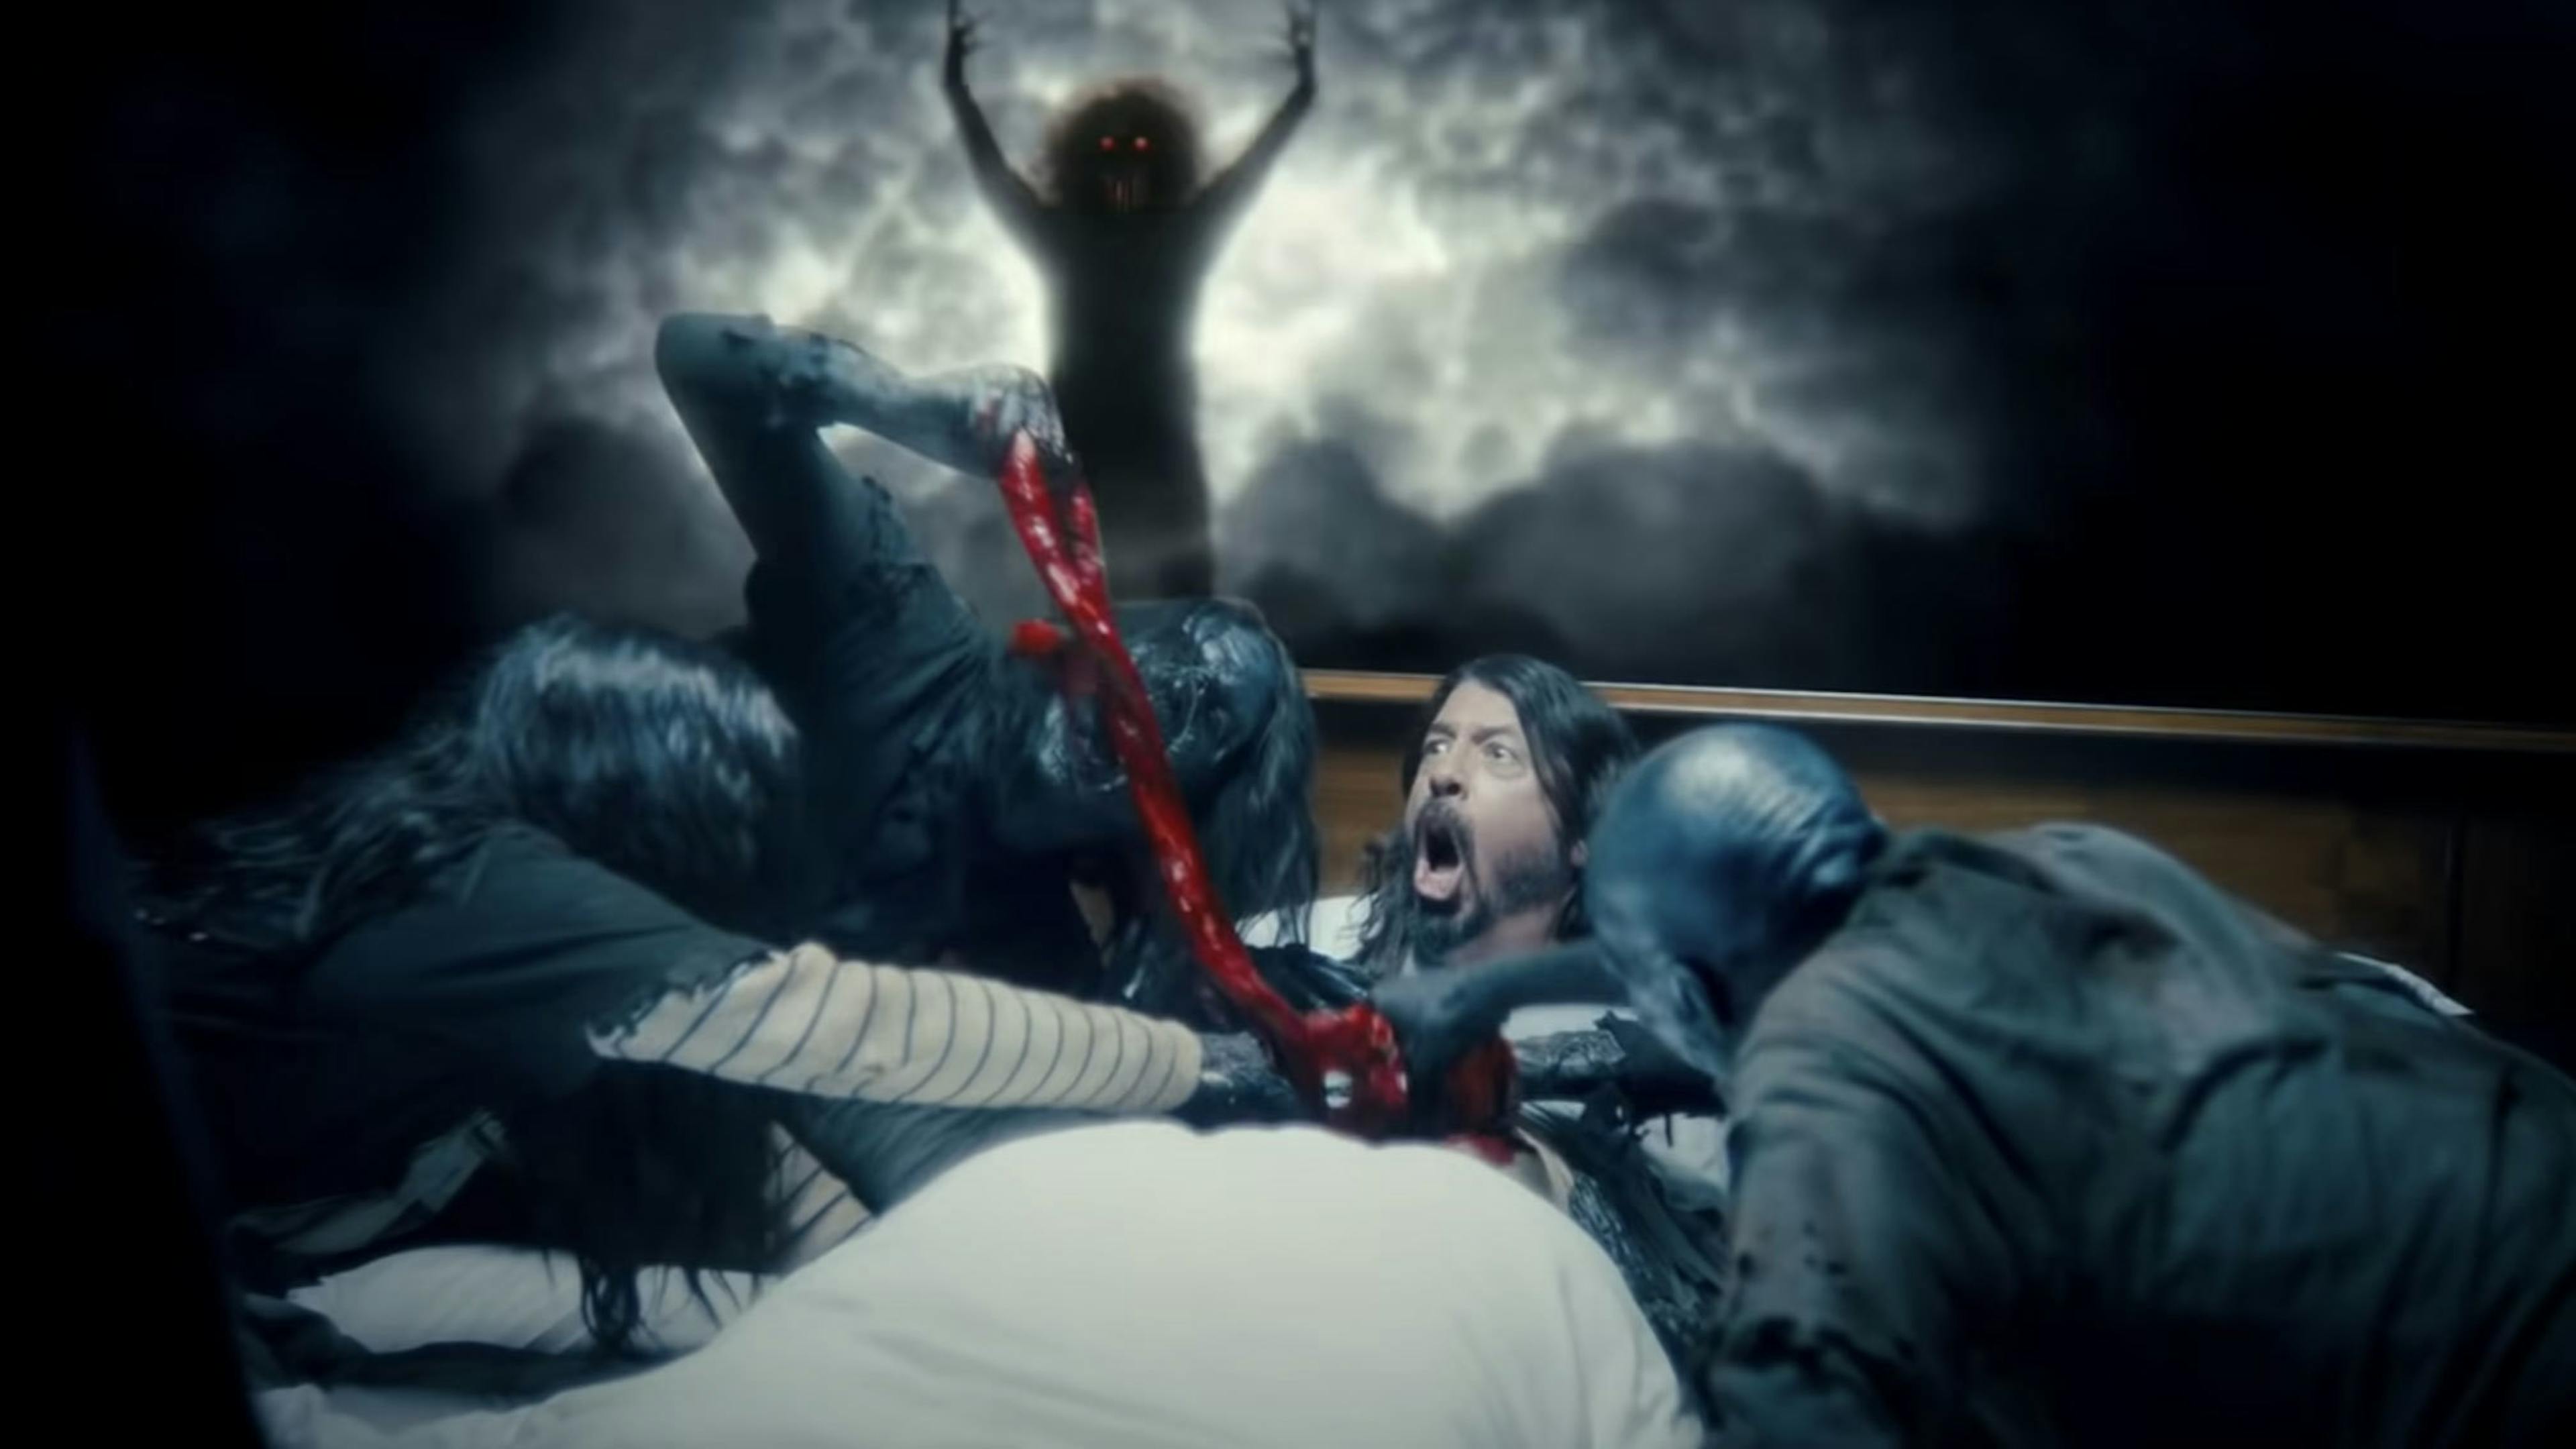 Foo Fighters: Watch the incredibly gory new trailer for the band’s horror-comedy Studio 666